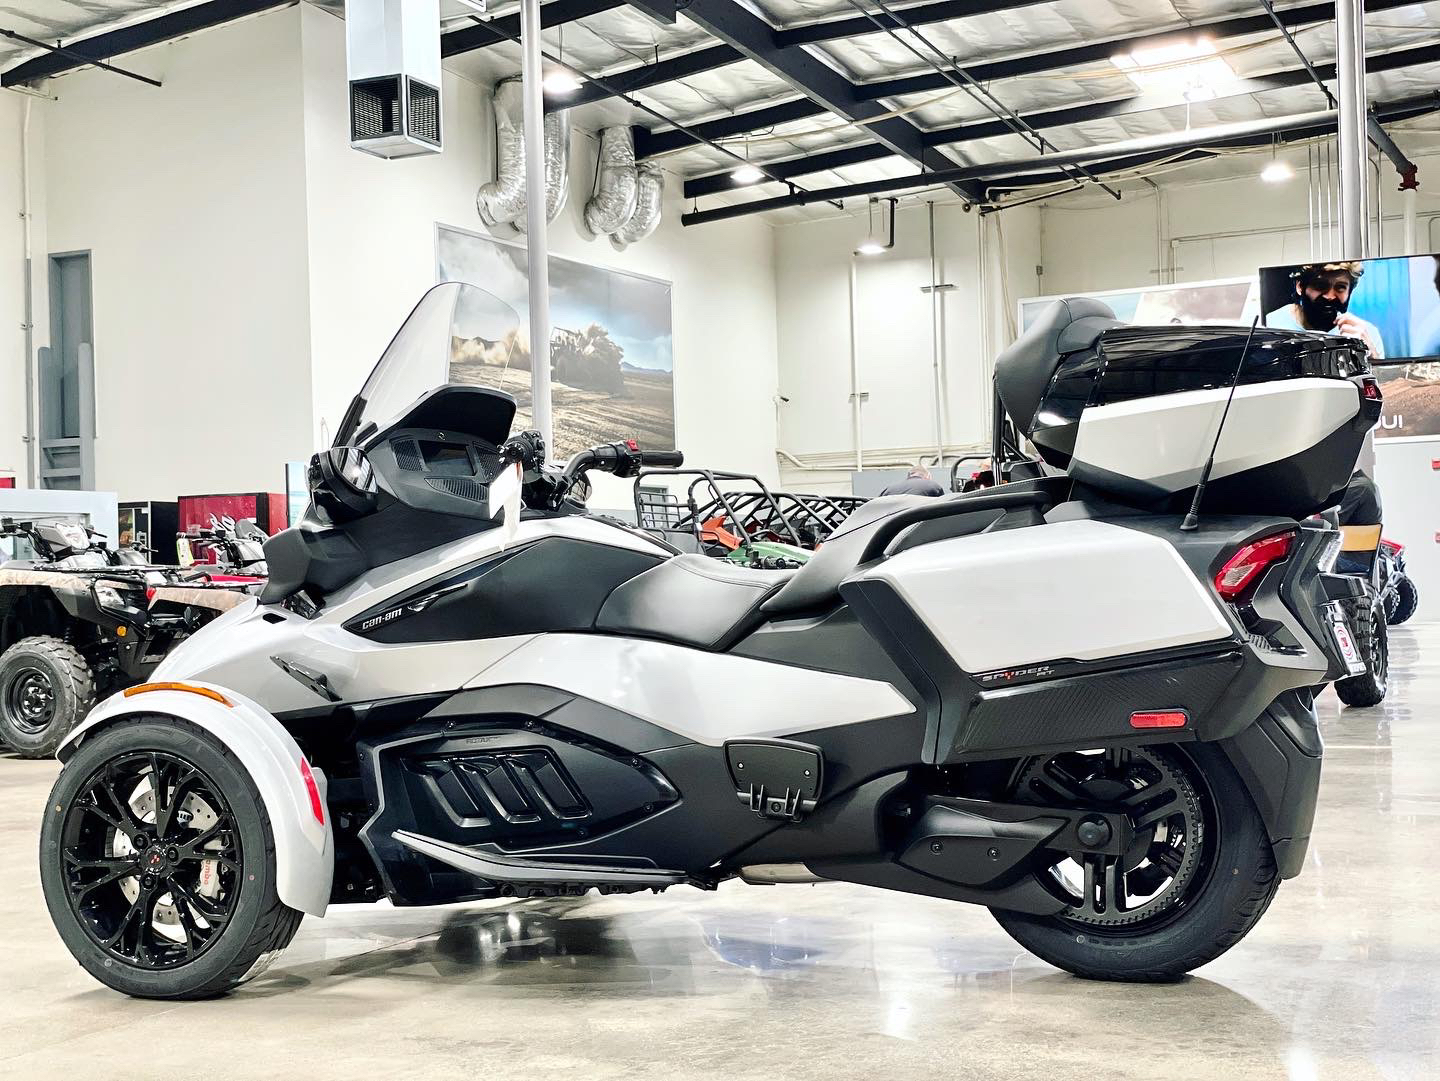 2022 Can-Am Spyder RT Limited in Corona, California - Photo 1